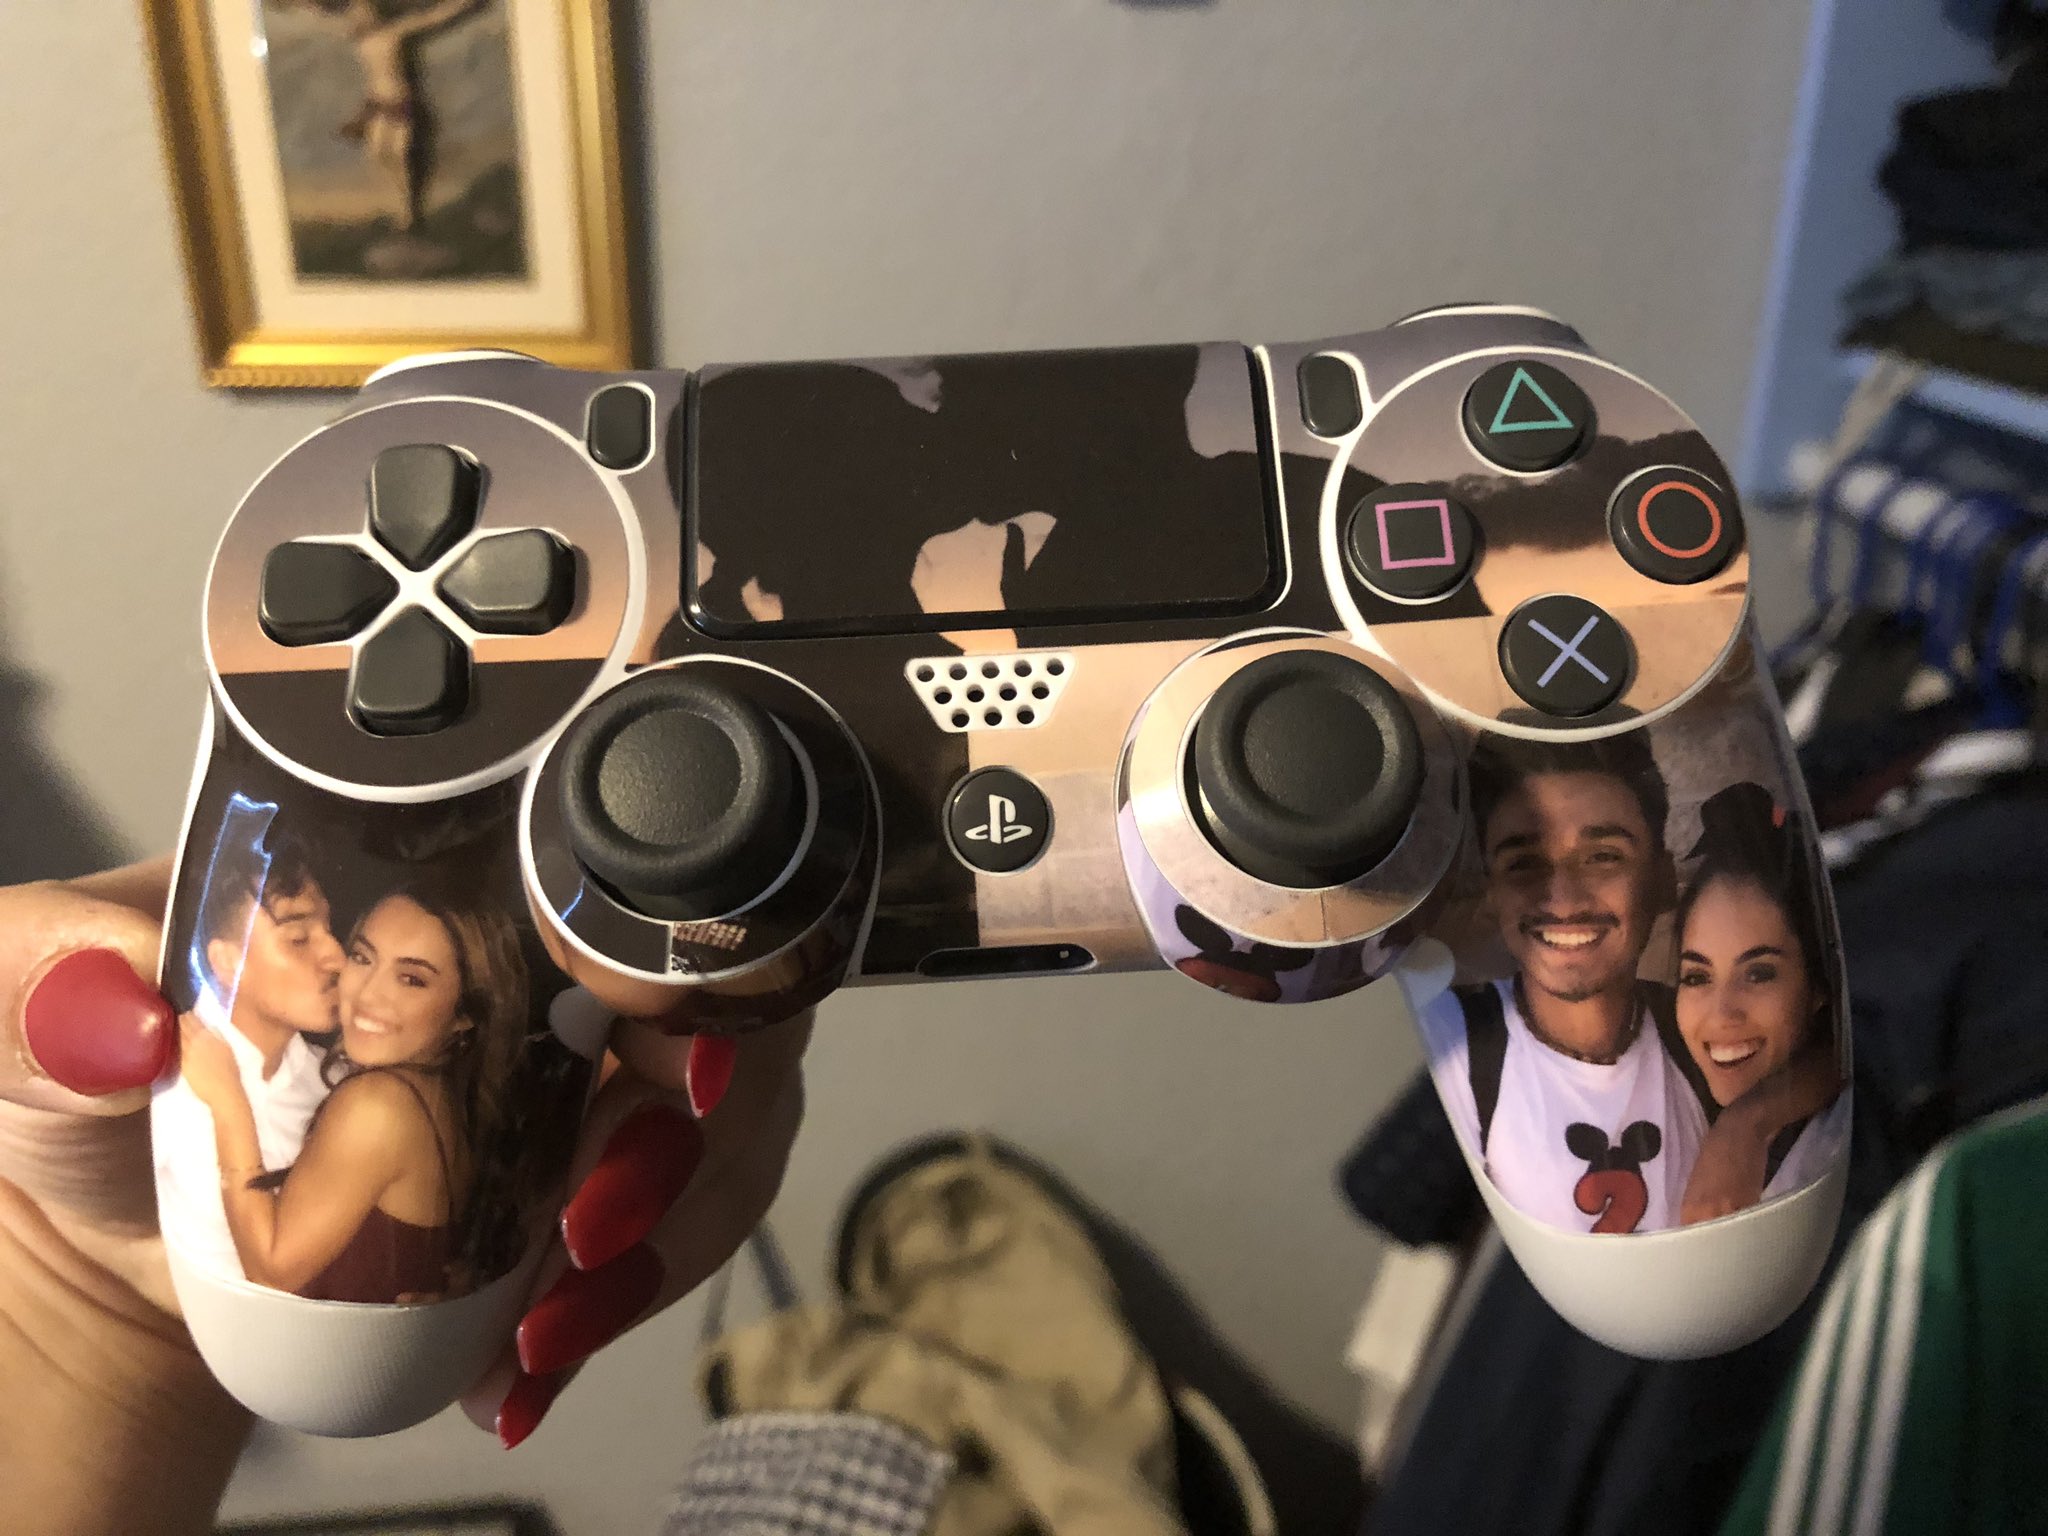 Rend Fortære Halloween jazmin 🎄 on Twitter: "my brother's girlfriend got him a sticker for a ps4  controller so he went and got a brand new controller and he said it's his  new favorite https://t.co/UlTWHIcDFv" /